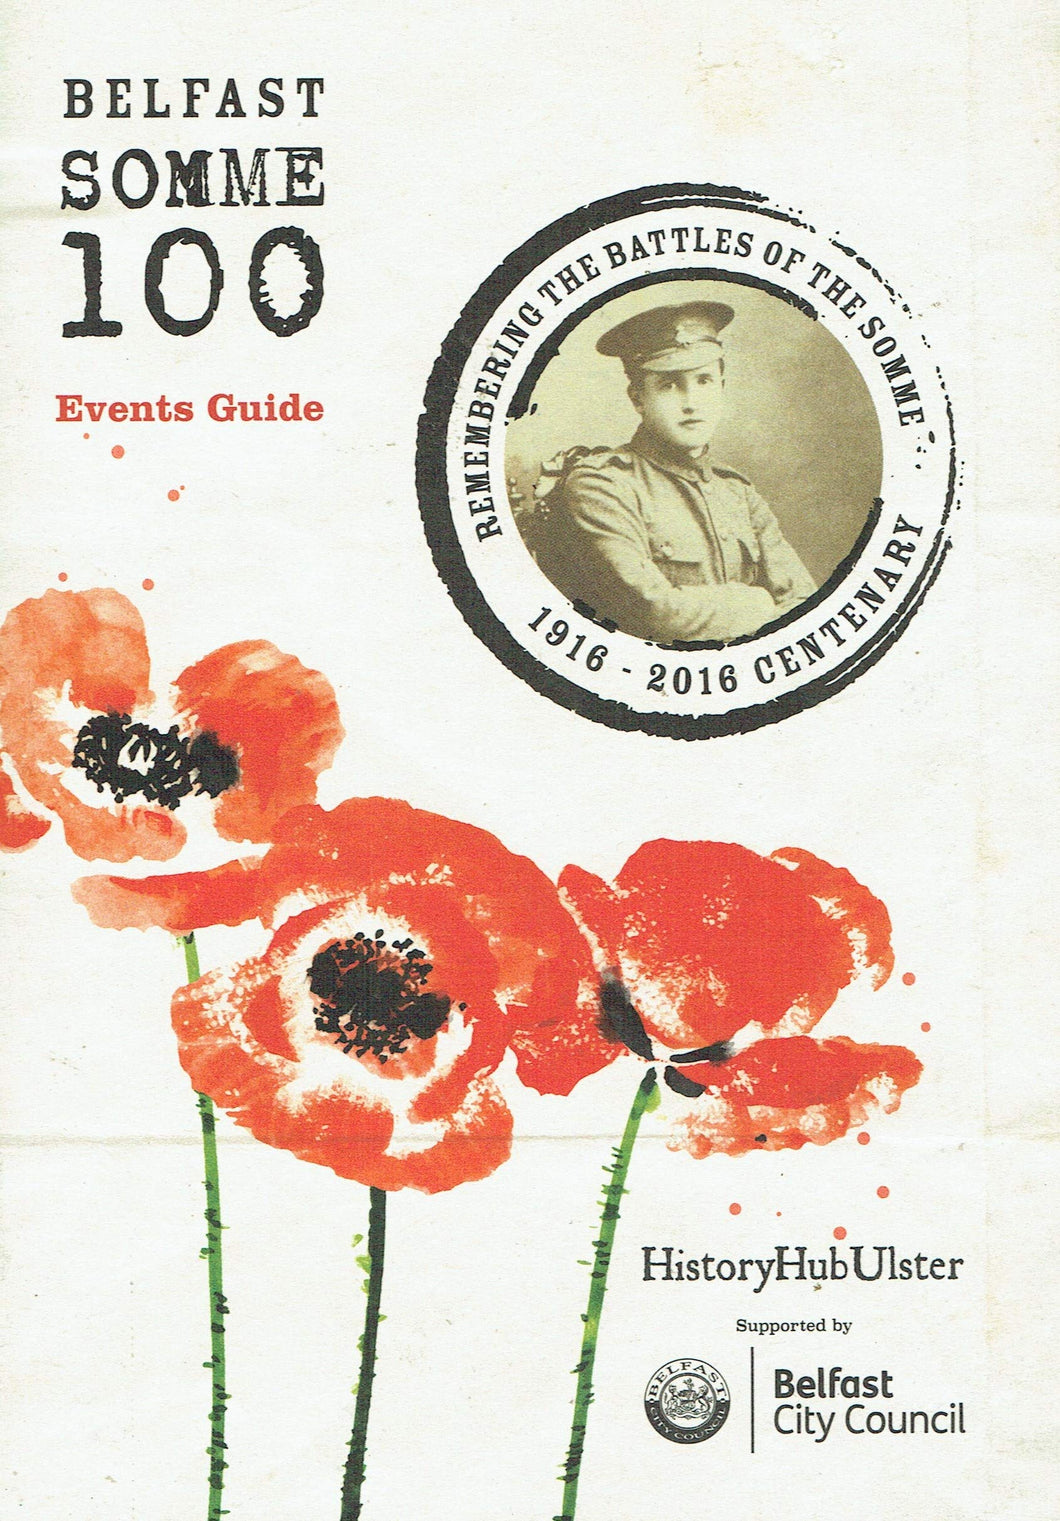 Belfast Somme 100 Events Guide - Remembering the Battles of the Somme 1916 - 2016 Centenary